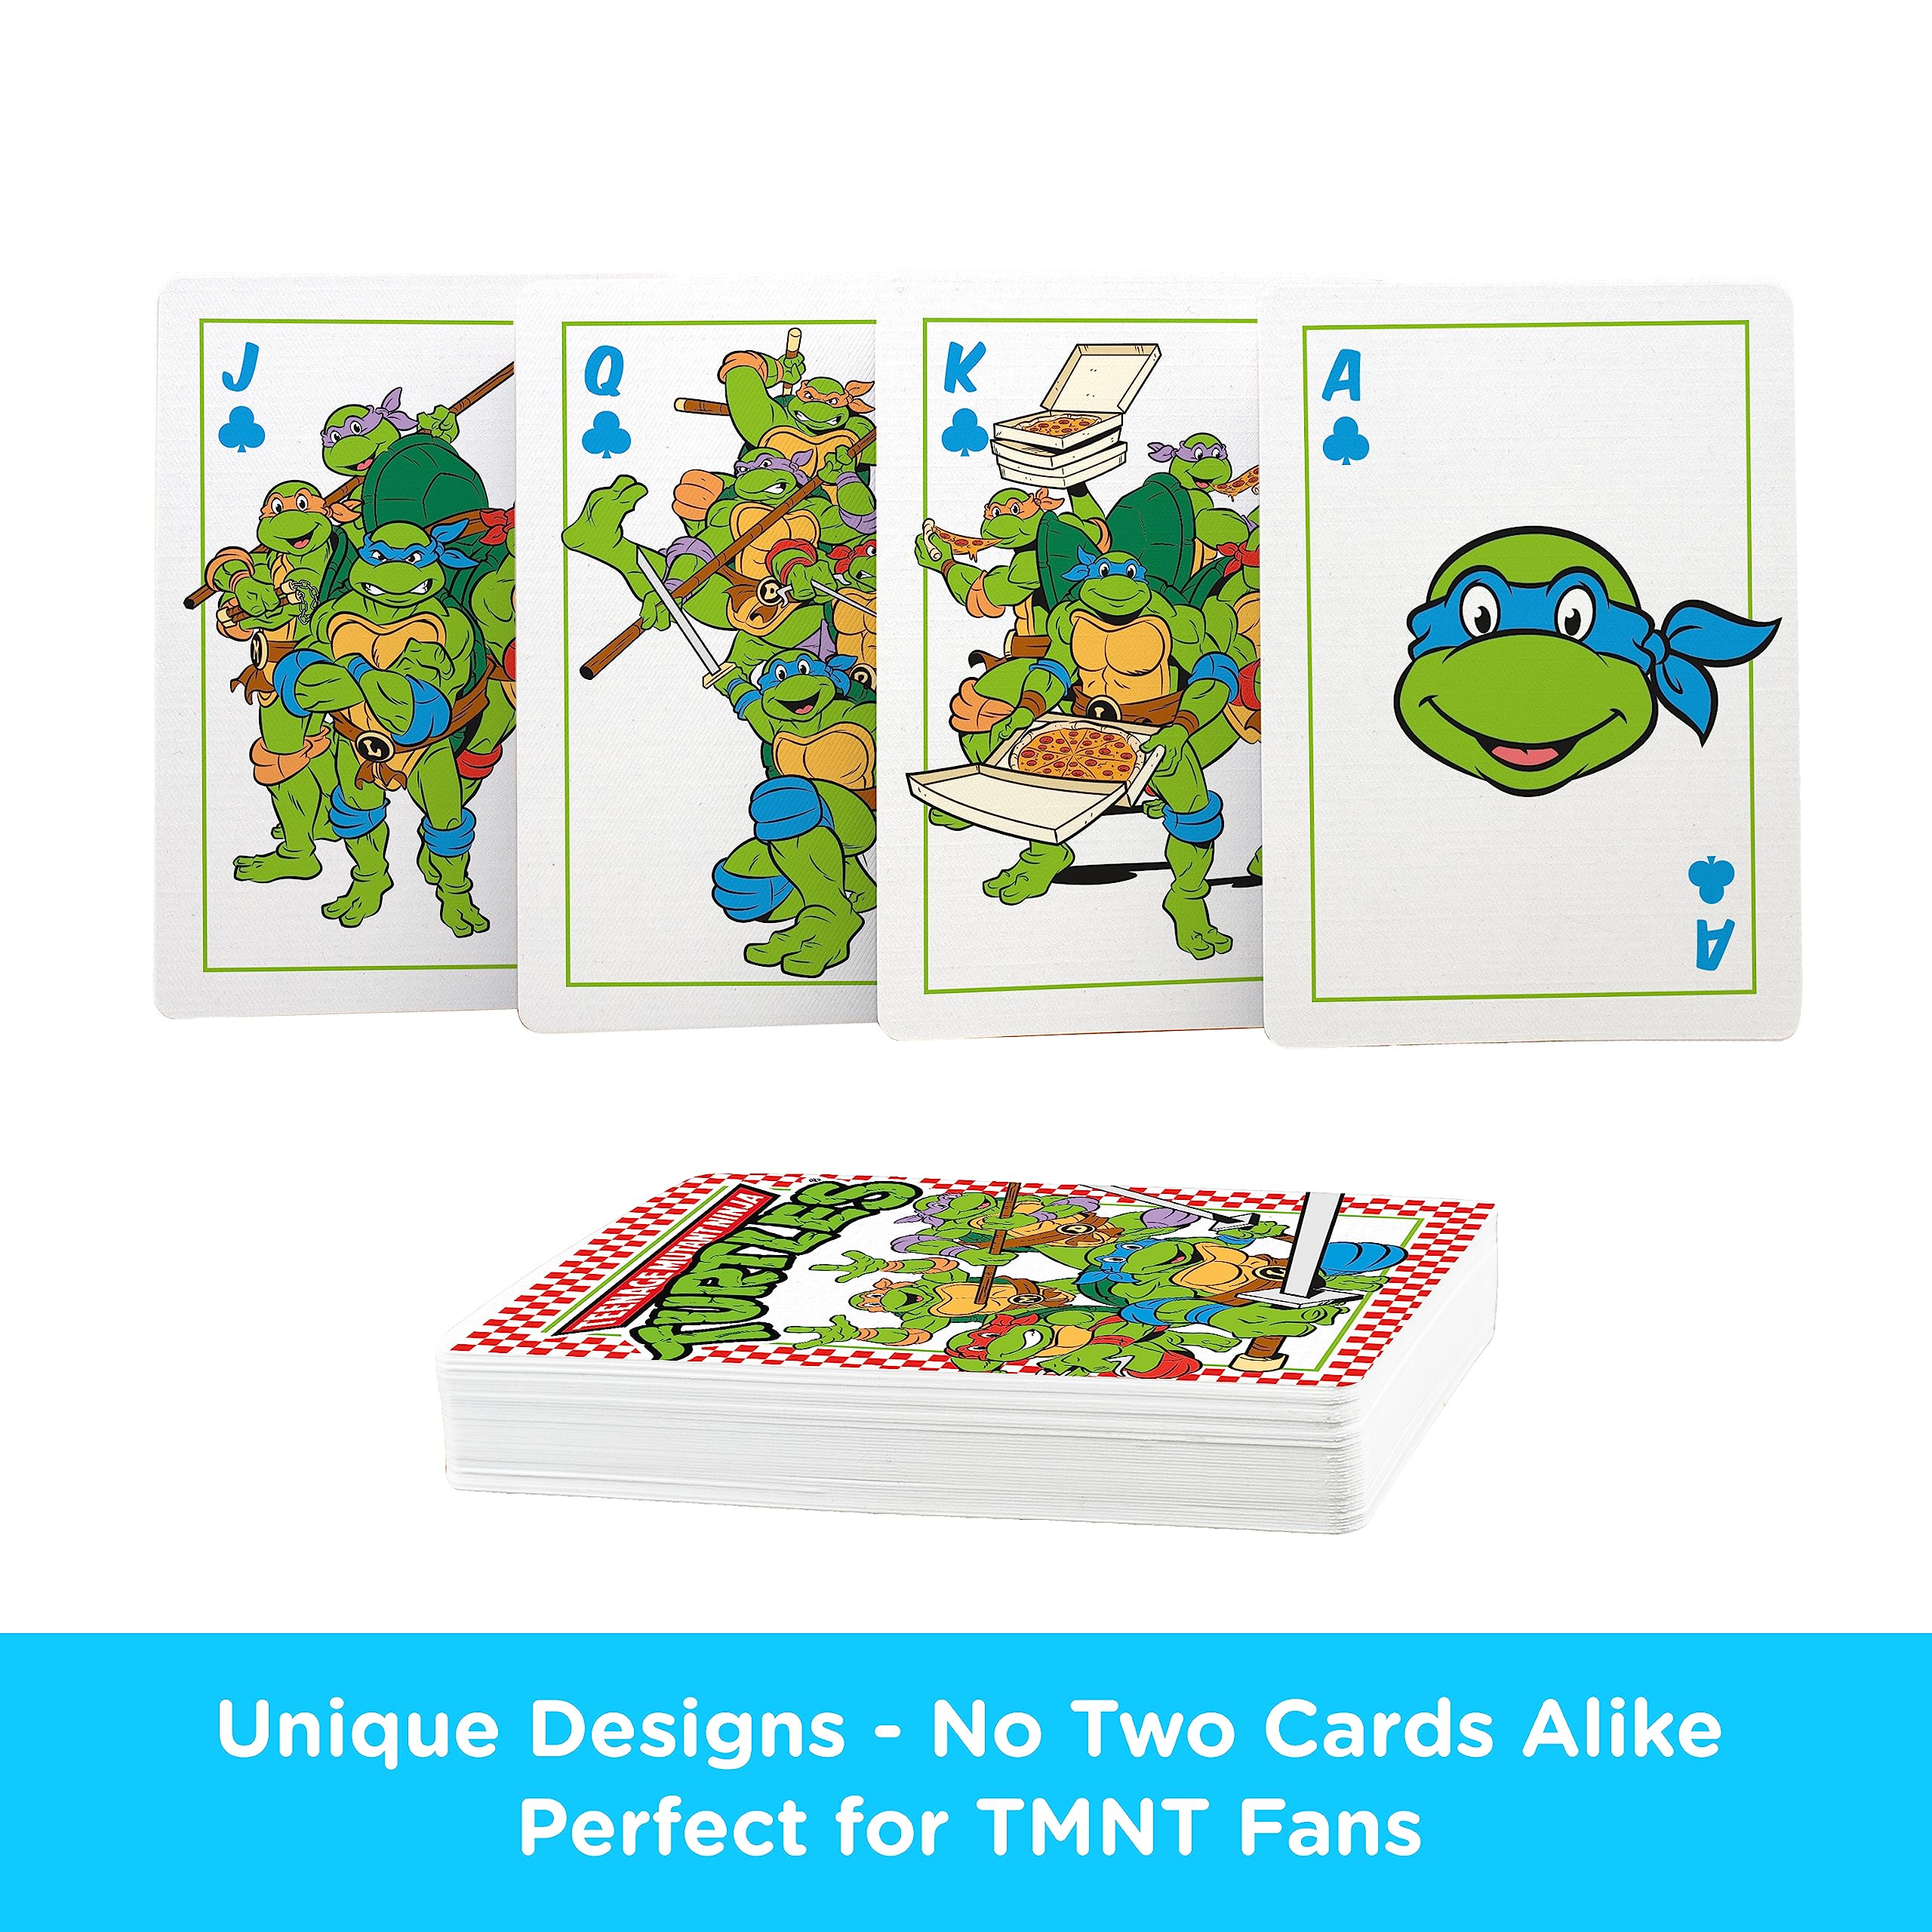 AQUARIUS Teenage Mutant Ninja Turtles Pizza Playing Cards – TMNT Themed Deck of Cards for Your Favorite Card Games - Officially Licensed TMNT Merchandise & Collectibles